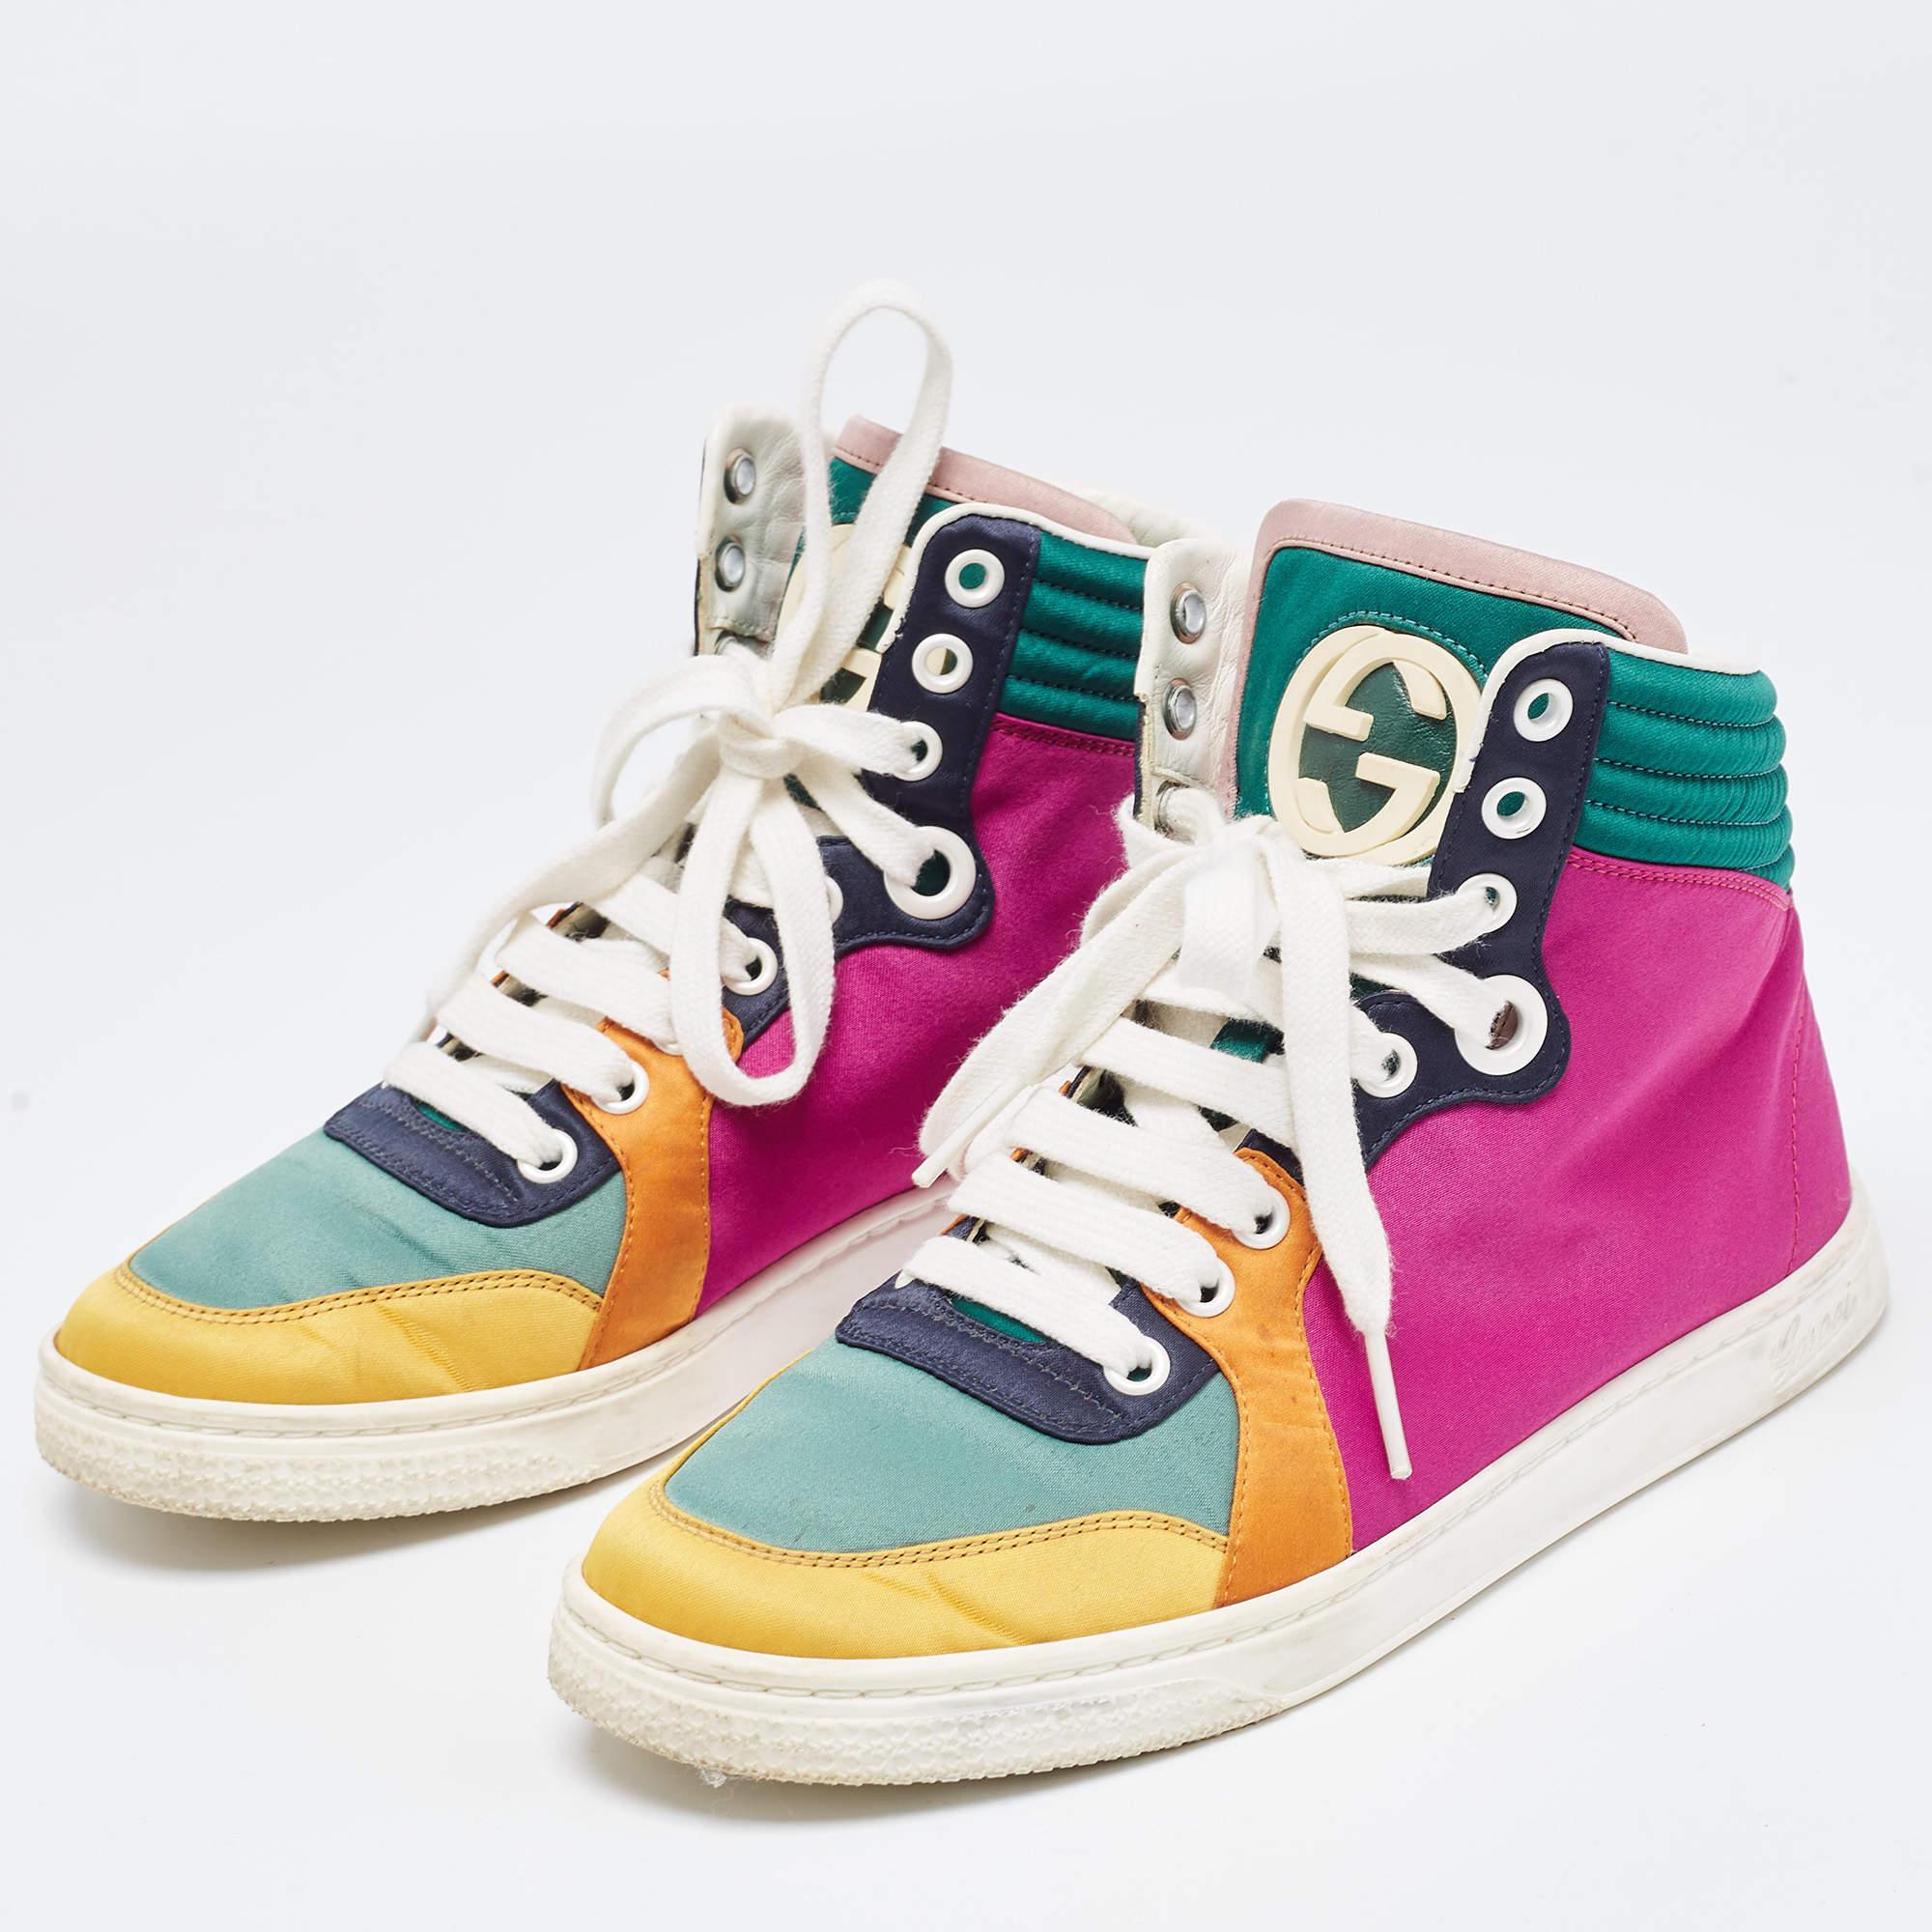 Sneakers from Gucci will add style, comfort, and relaxation any day. Crafted from high-quality materials into a sturdy profile, these sneakers are the best pick to amp up any casual or leisure looks.

